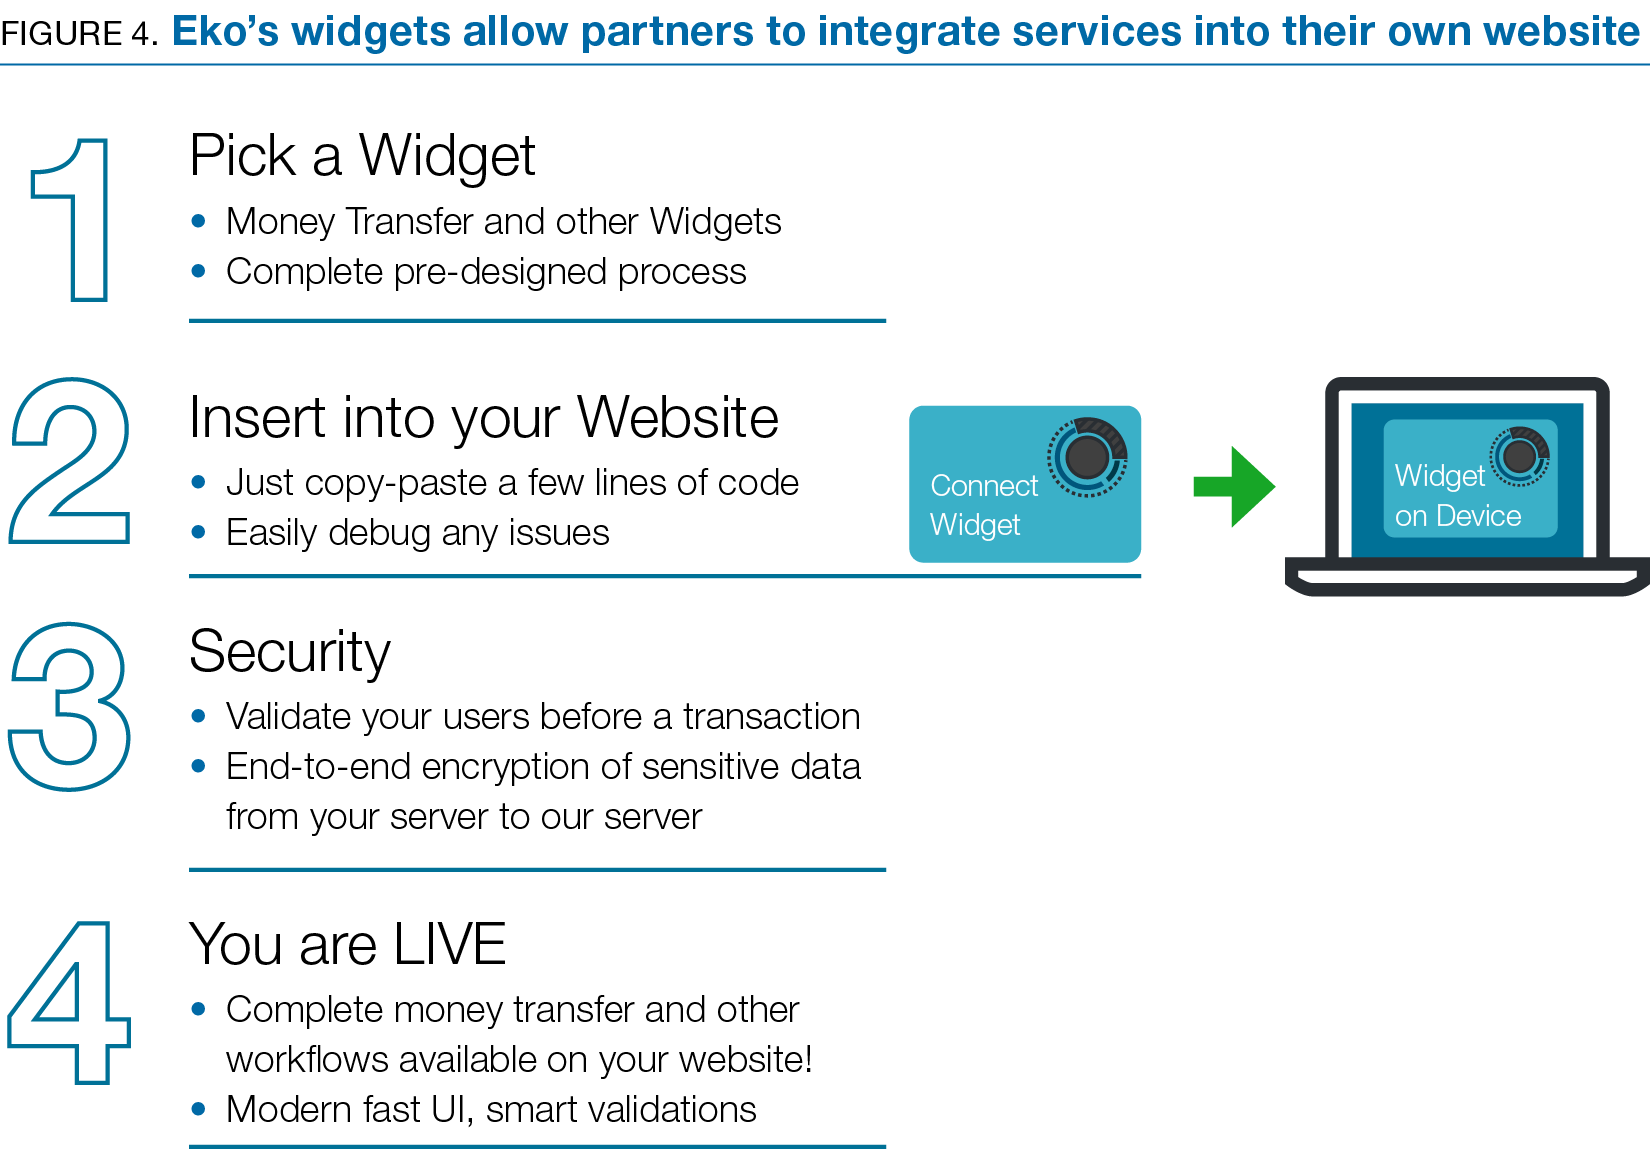 FIGURE 4. Eko’s widgets allow partners to integrate services into their own website